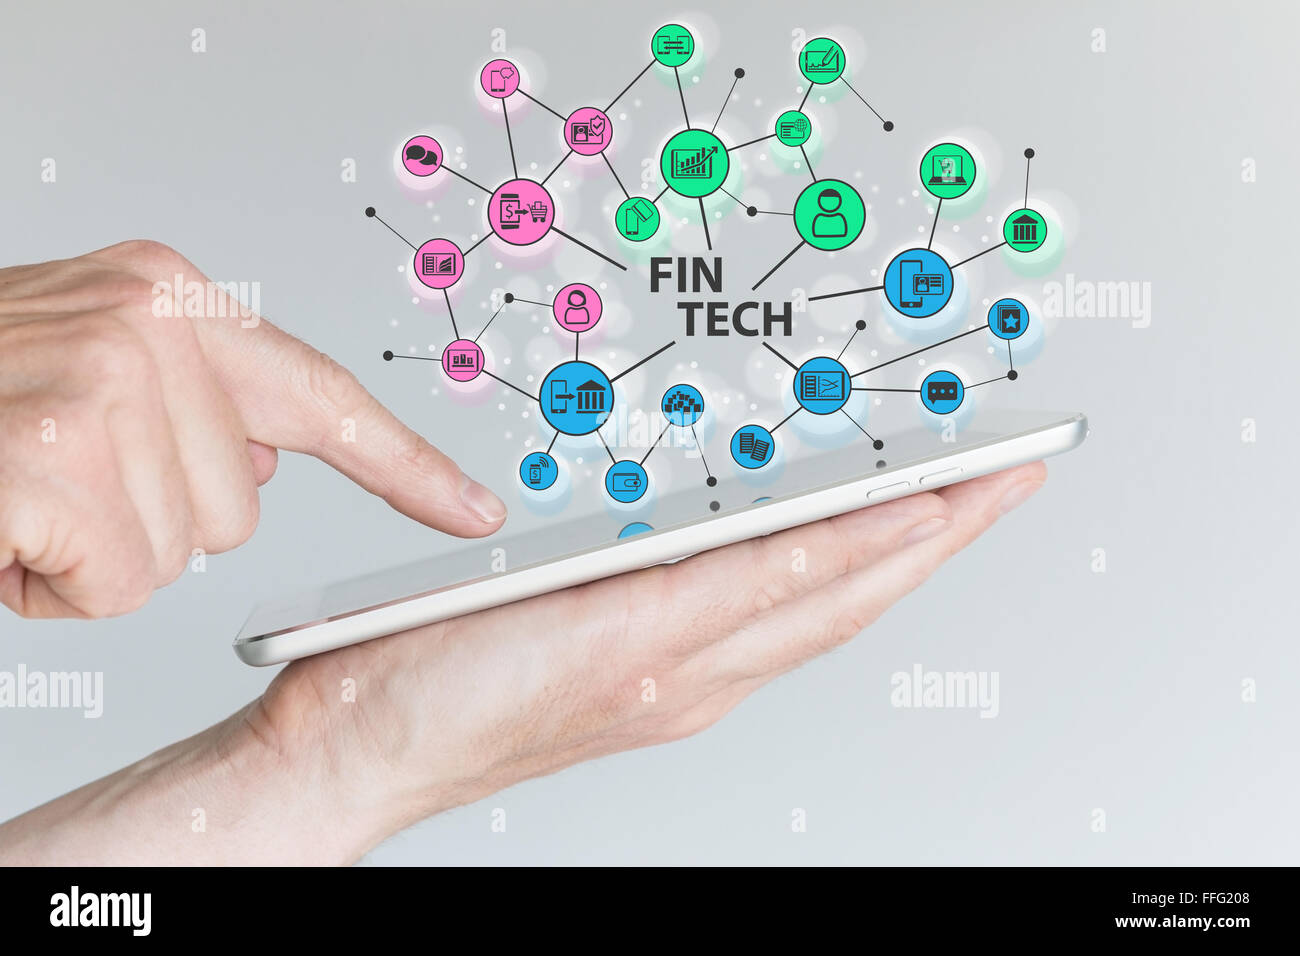 Fin Tech and mobile computing concept. Hand holding tablet with network of financial information technology objects in front of Stock Photo